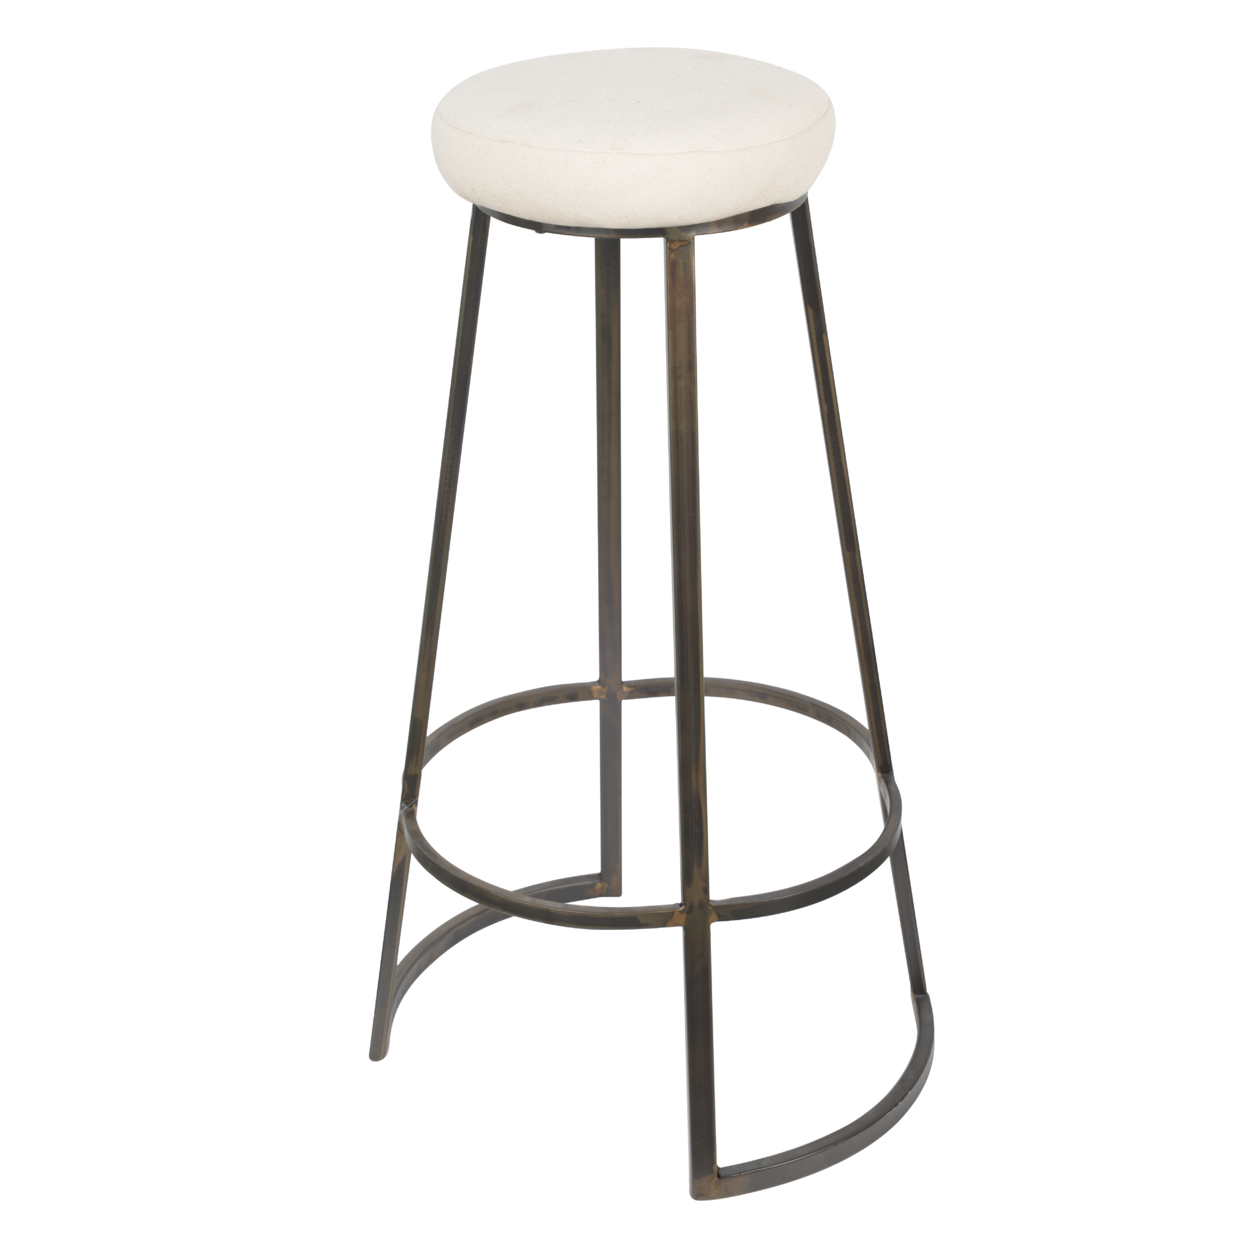 Metal Framed Backless Counter Stool With Polyester Seat, Black & White- Saltoro Sherpi